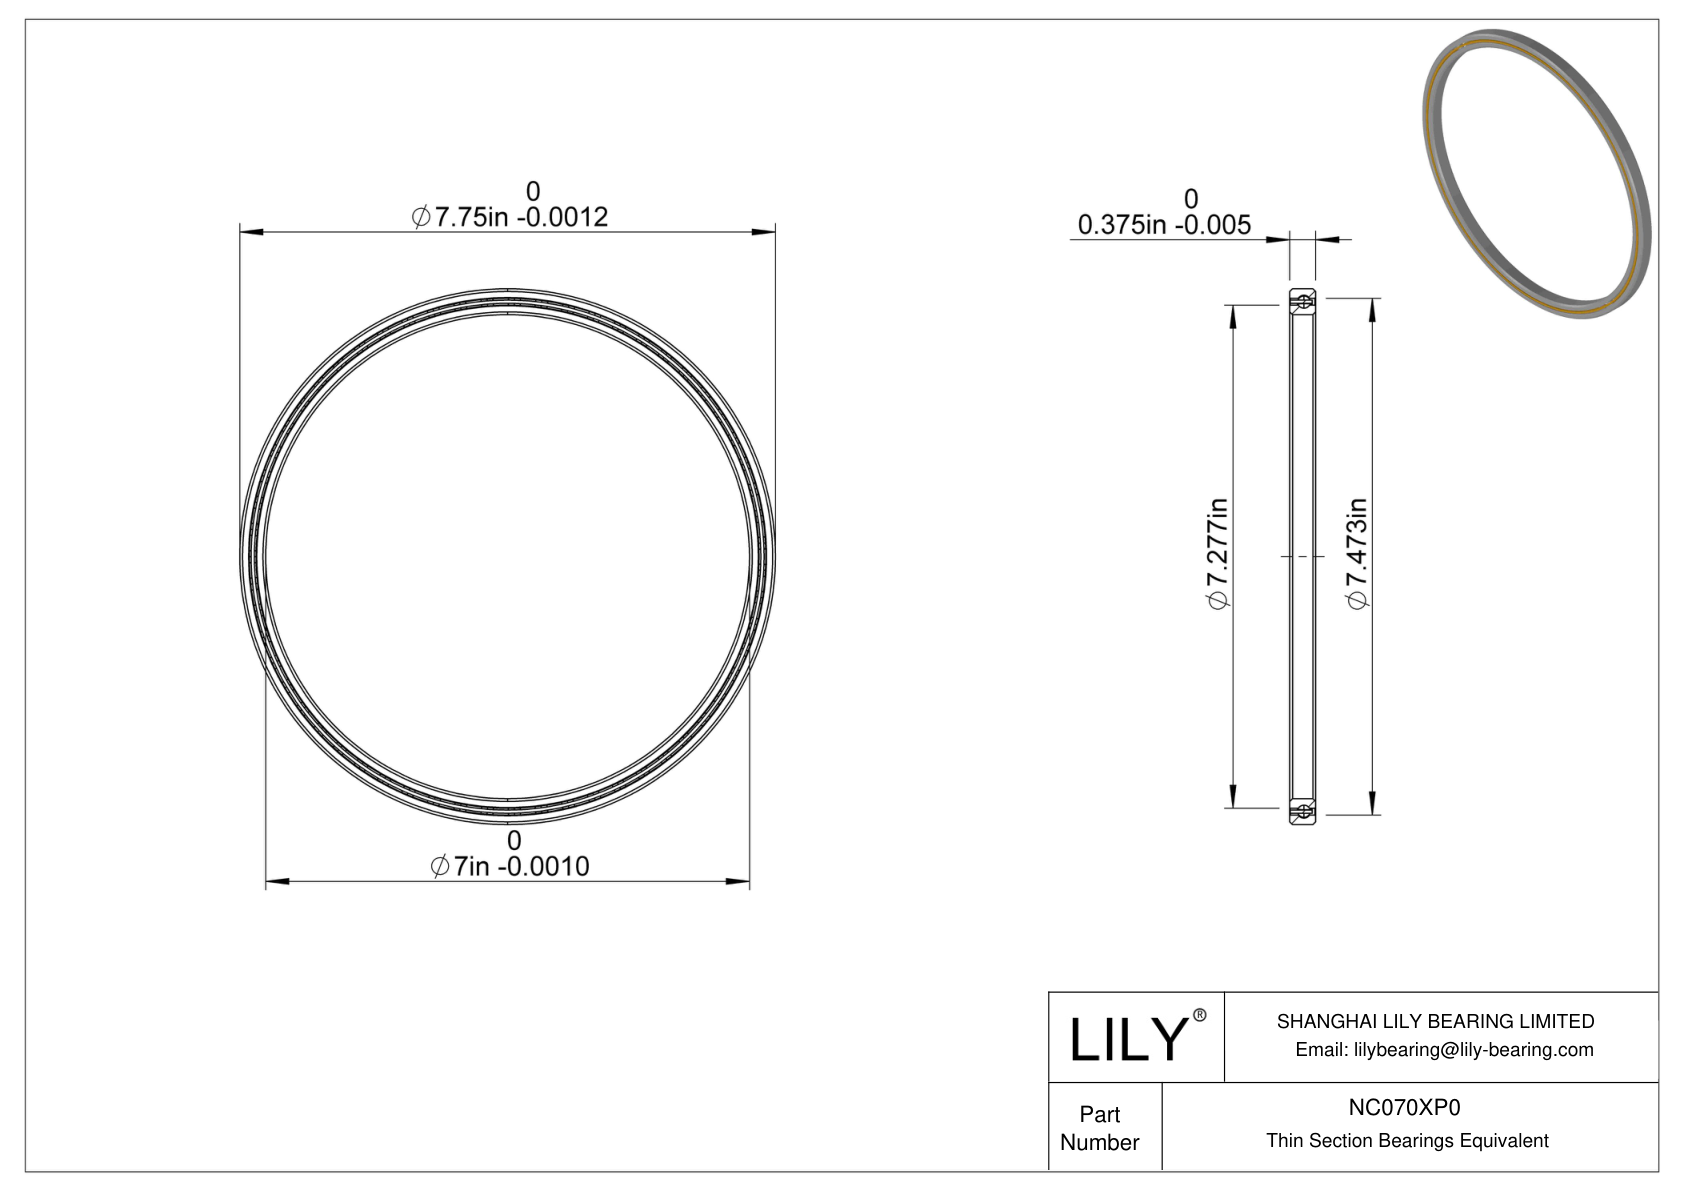 NC070XP0 Constant Section (CS) Bearings cad drawing